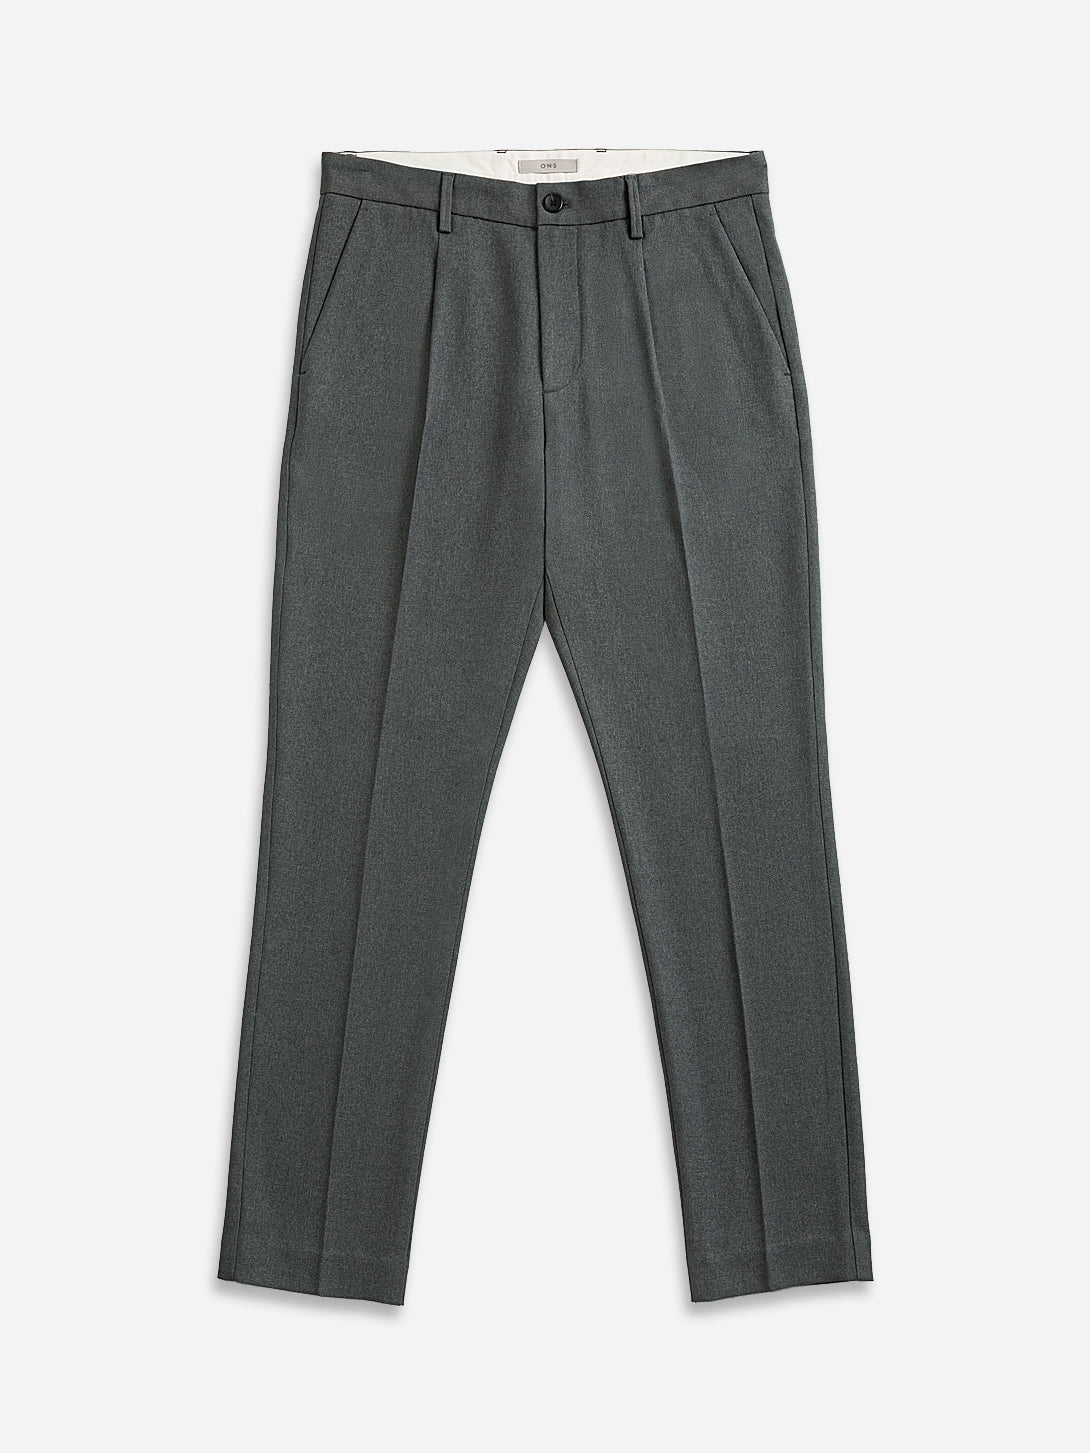 Forged Iron Niles Twill Mens Trouser Pants